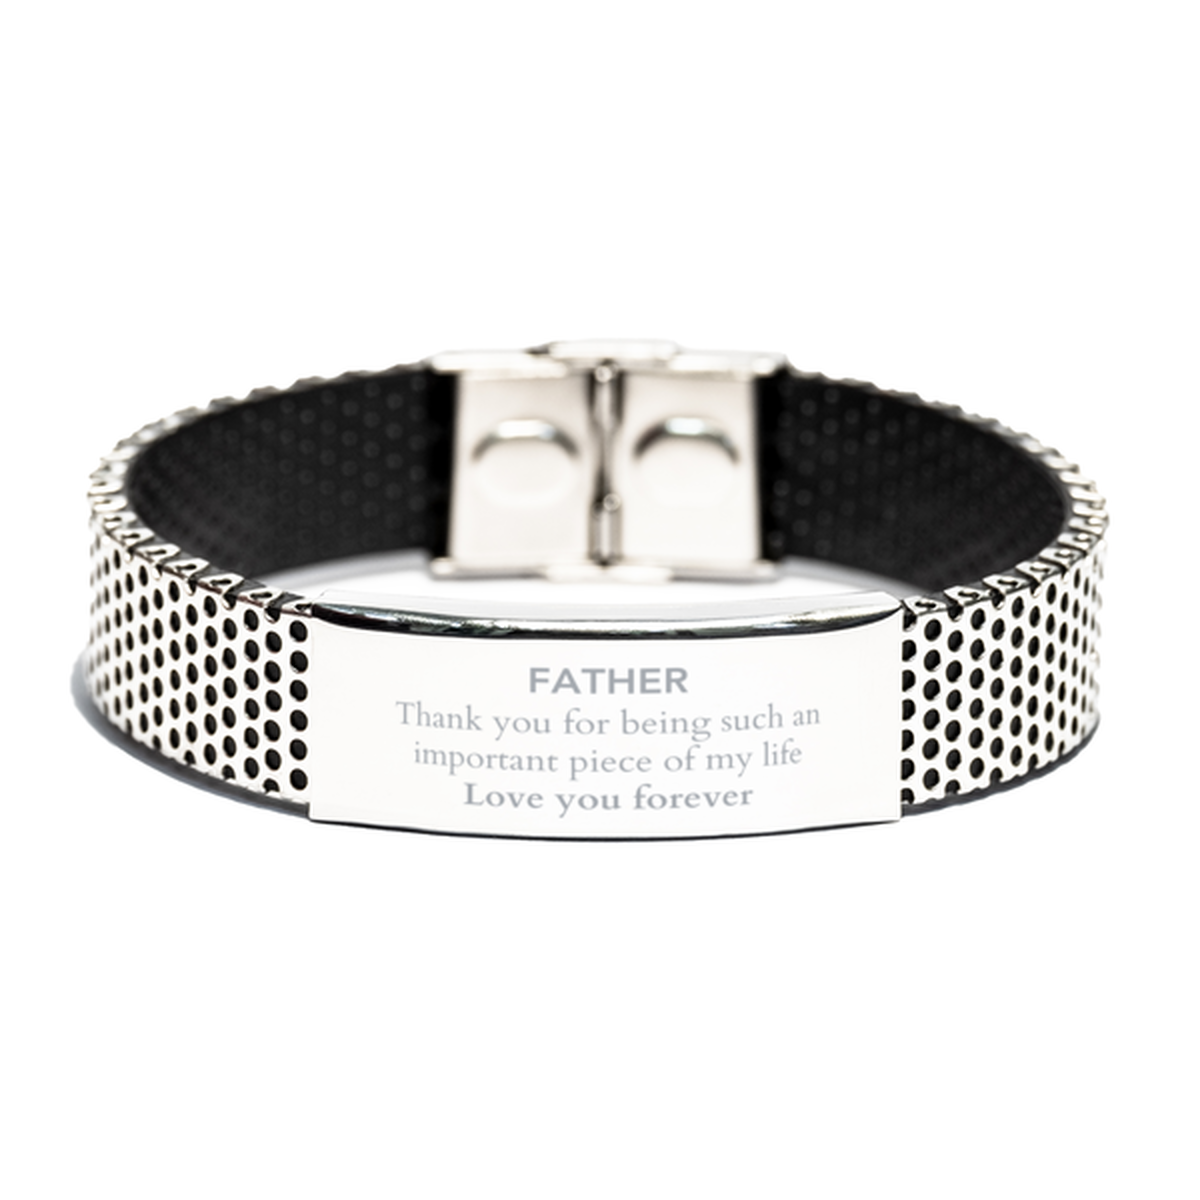 Appropriate Father Stainless Steel Bracelet Epic Birthday Gifts for Father Thank you for being such an important piece of my life Father Christmas Mothers Fathers Day